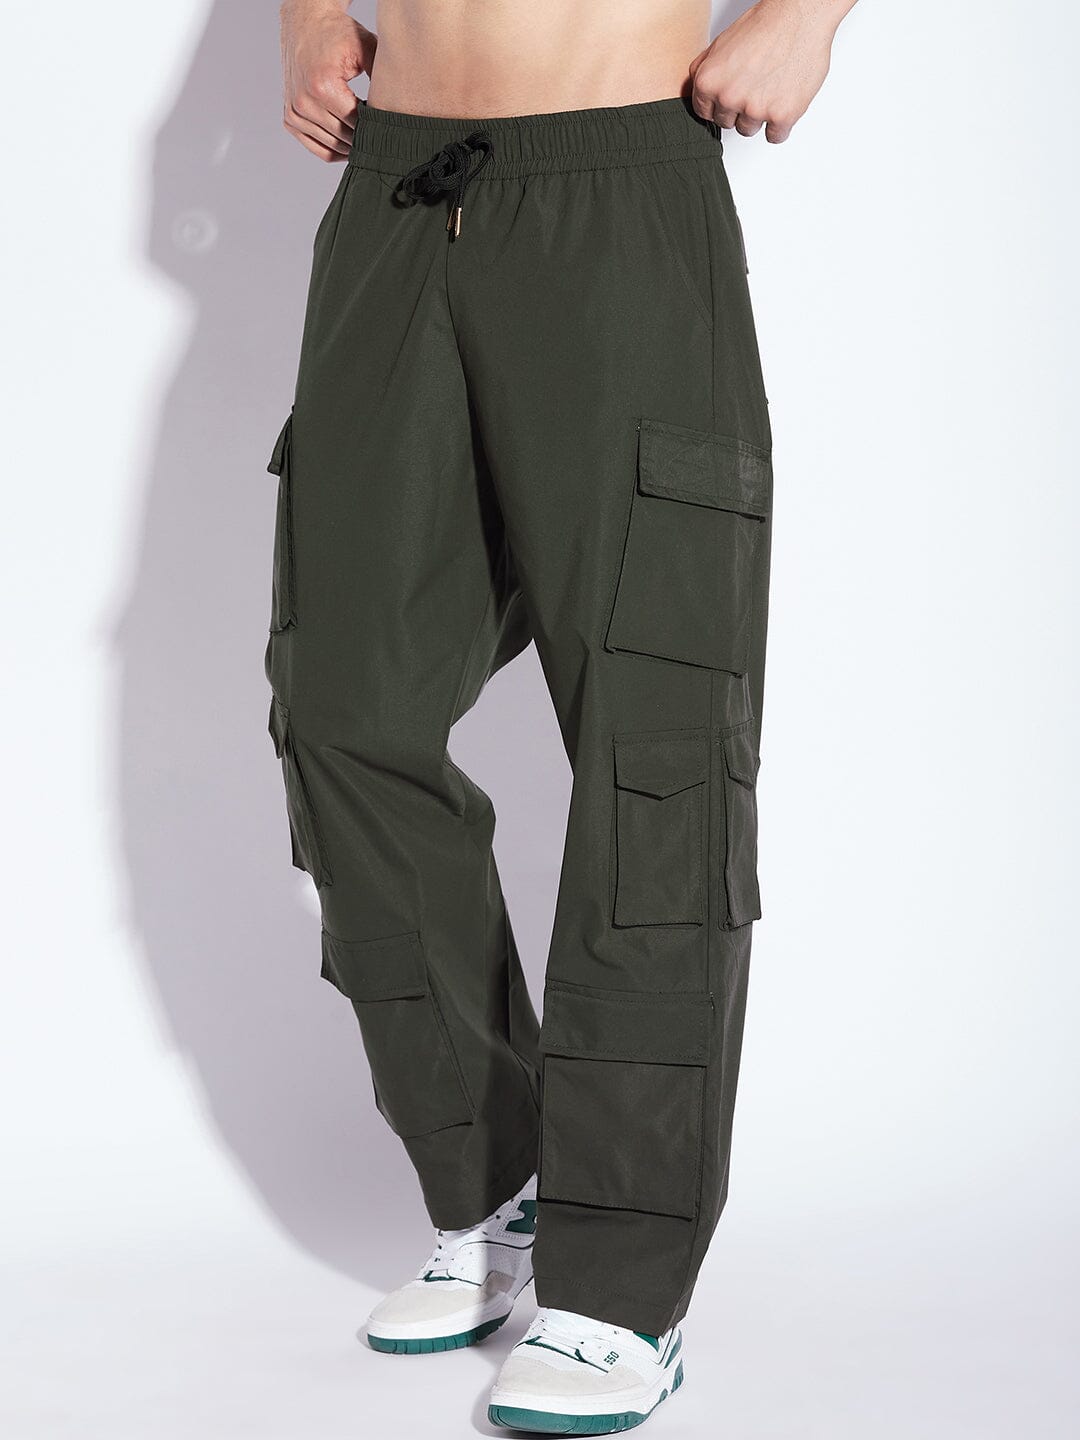 Shop Oversized Cargo Pants Online For Gym And Casual Wear – AestheticNation